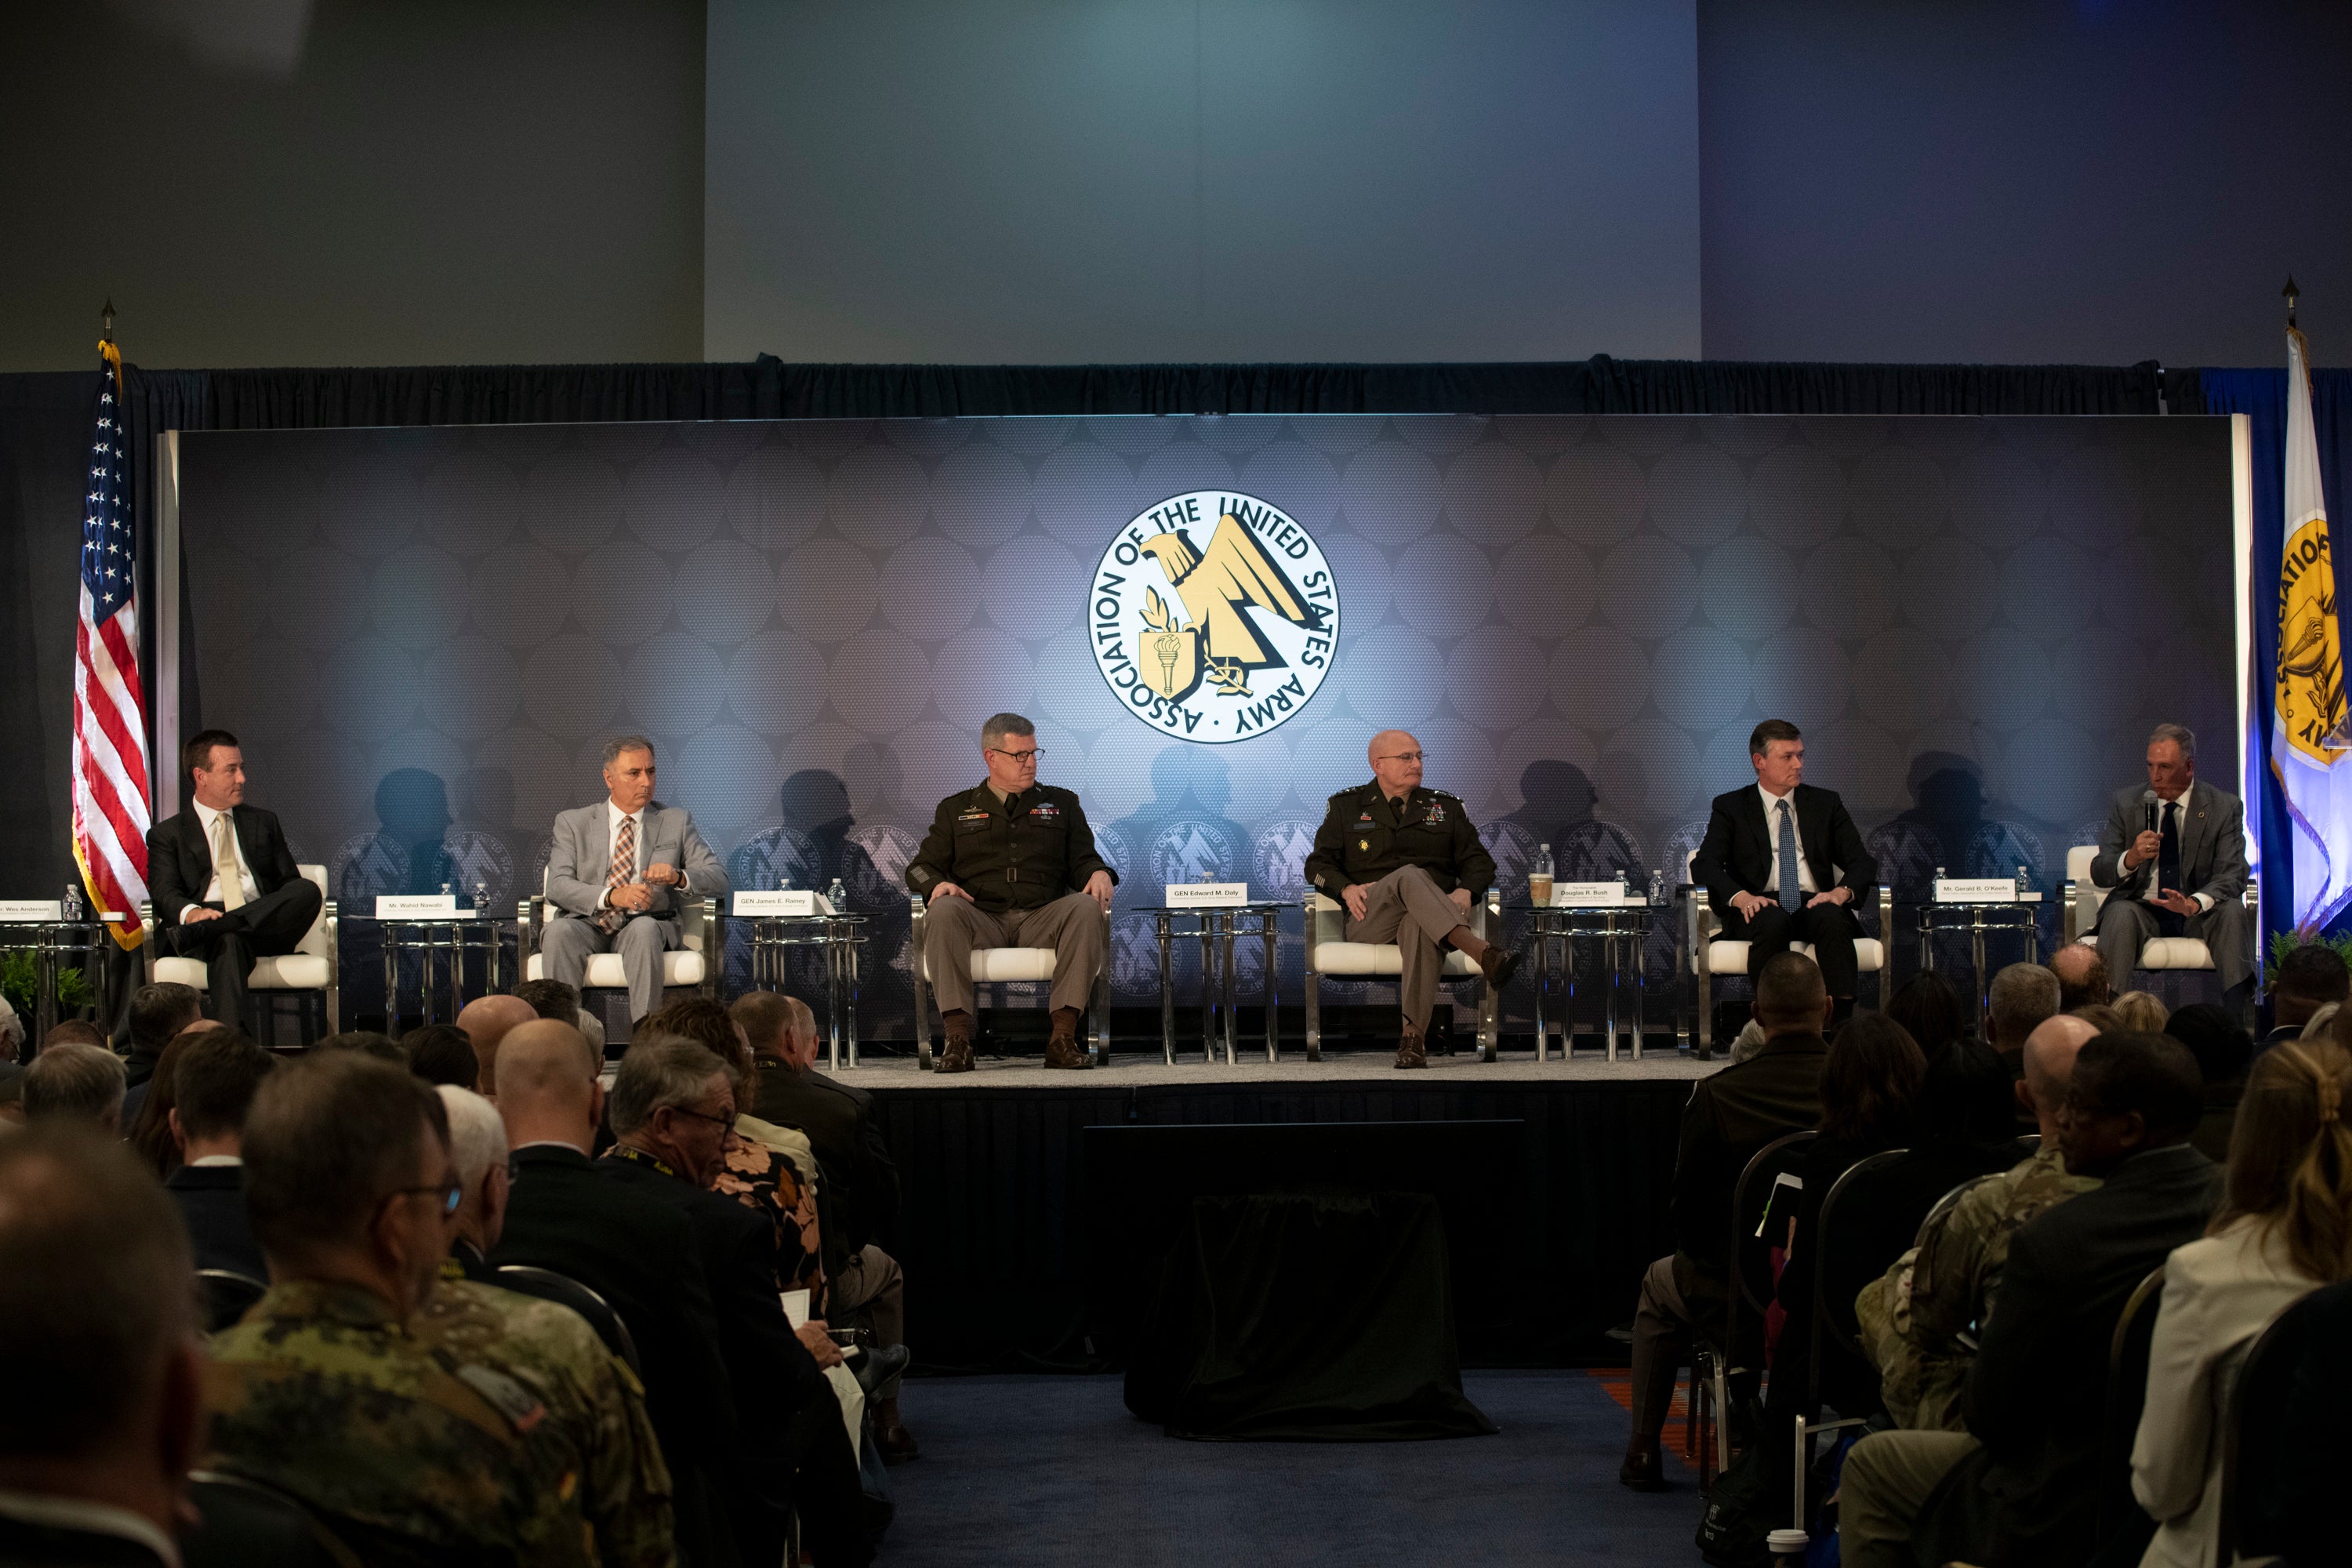 AUSA Contemporary Military Forum: Building the Army of 2030 - Modernization of Combat Capabilities at the AUSA 2022 Annual Meeting in Washington, D.C., Tuesday, Oct. 11, 2022. (Carol Guzy for AUSA)